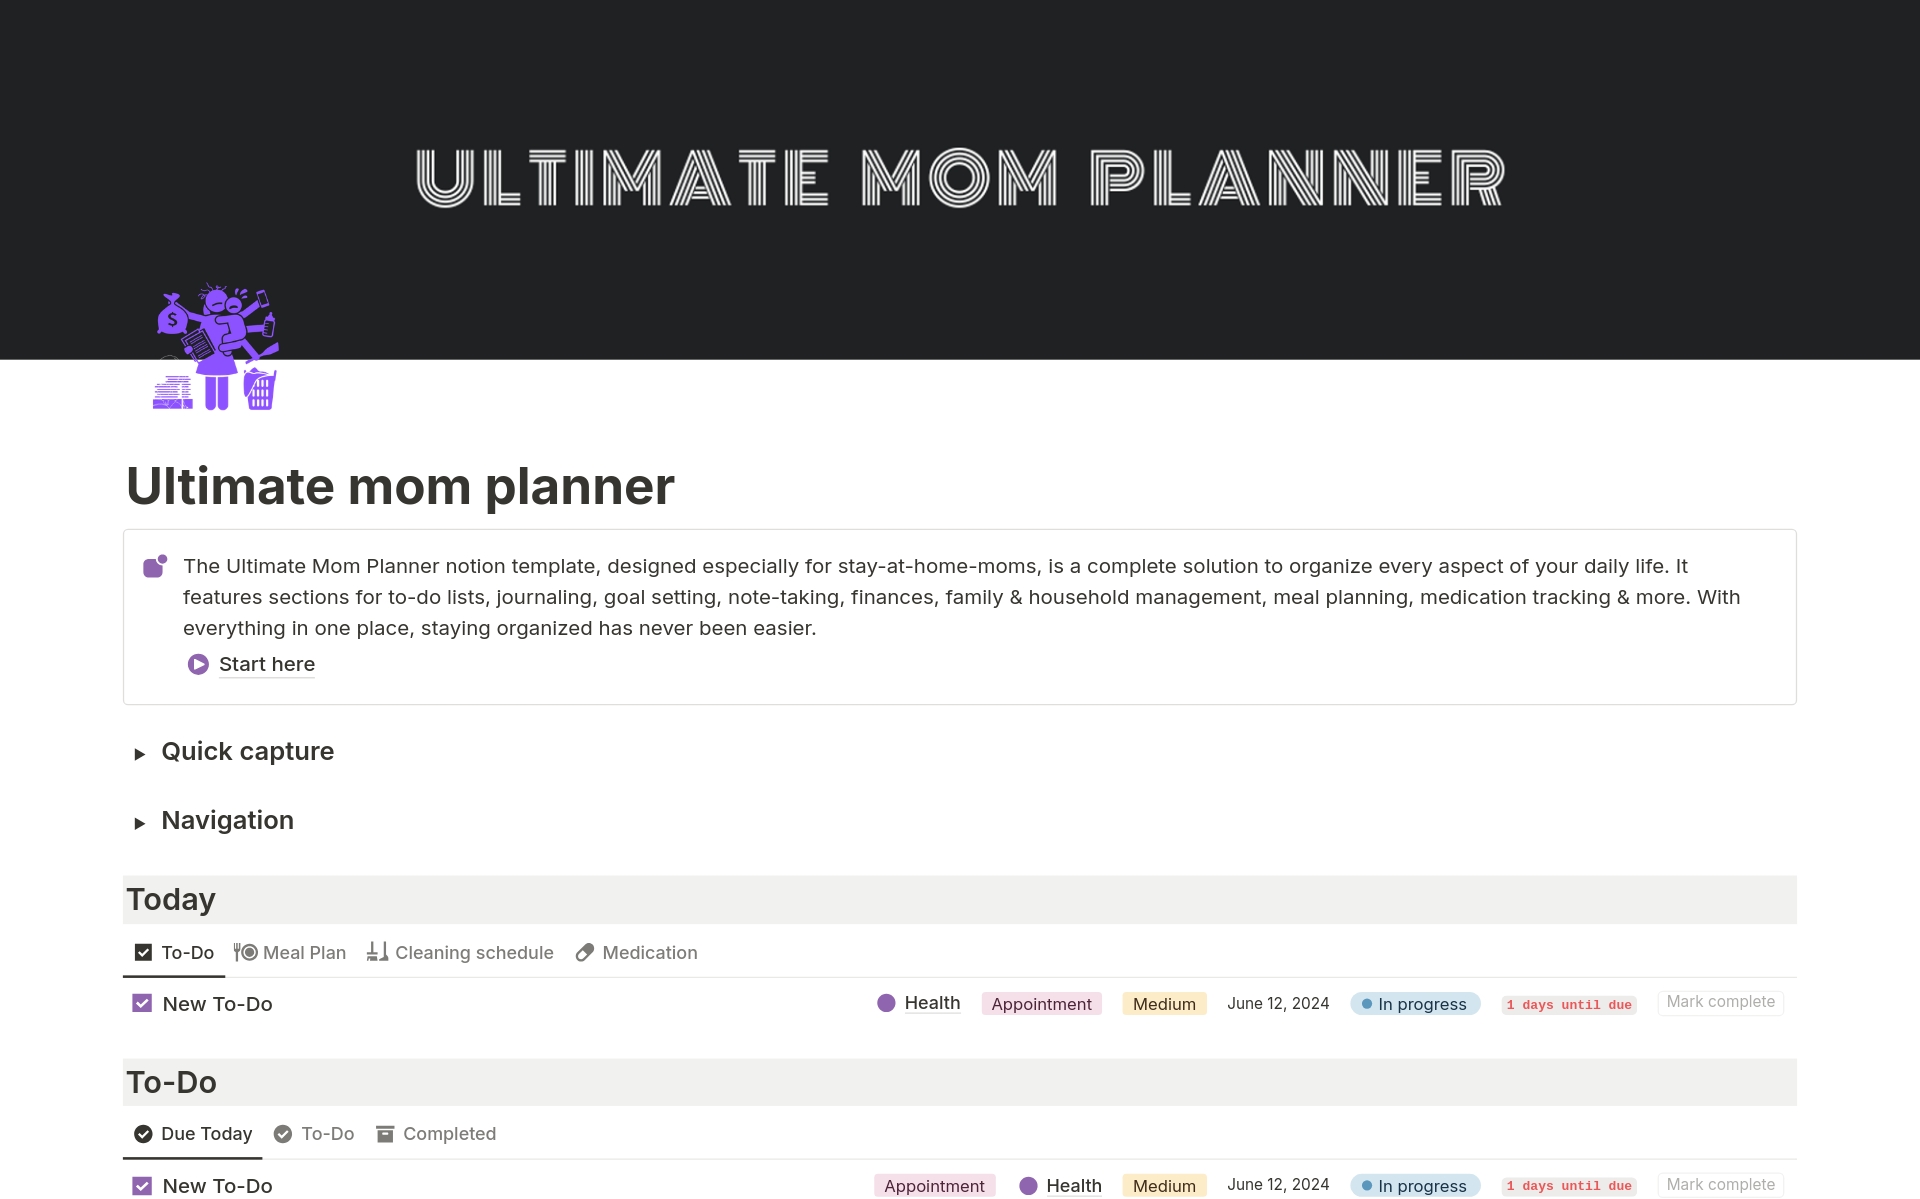 The Ultimate Mom Planner notion template, designed especially for stay-at-home-moms, is a complete solution to organize every aspect of your daily life.